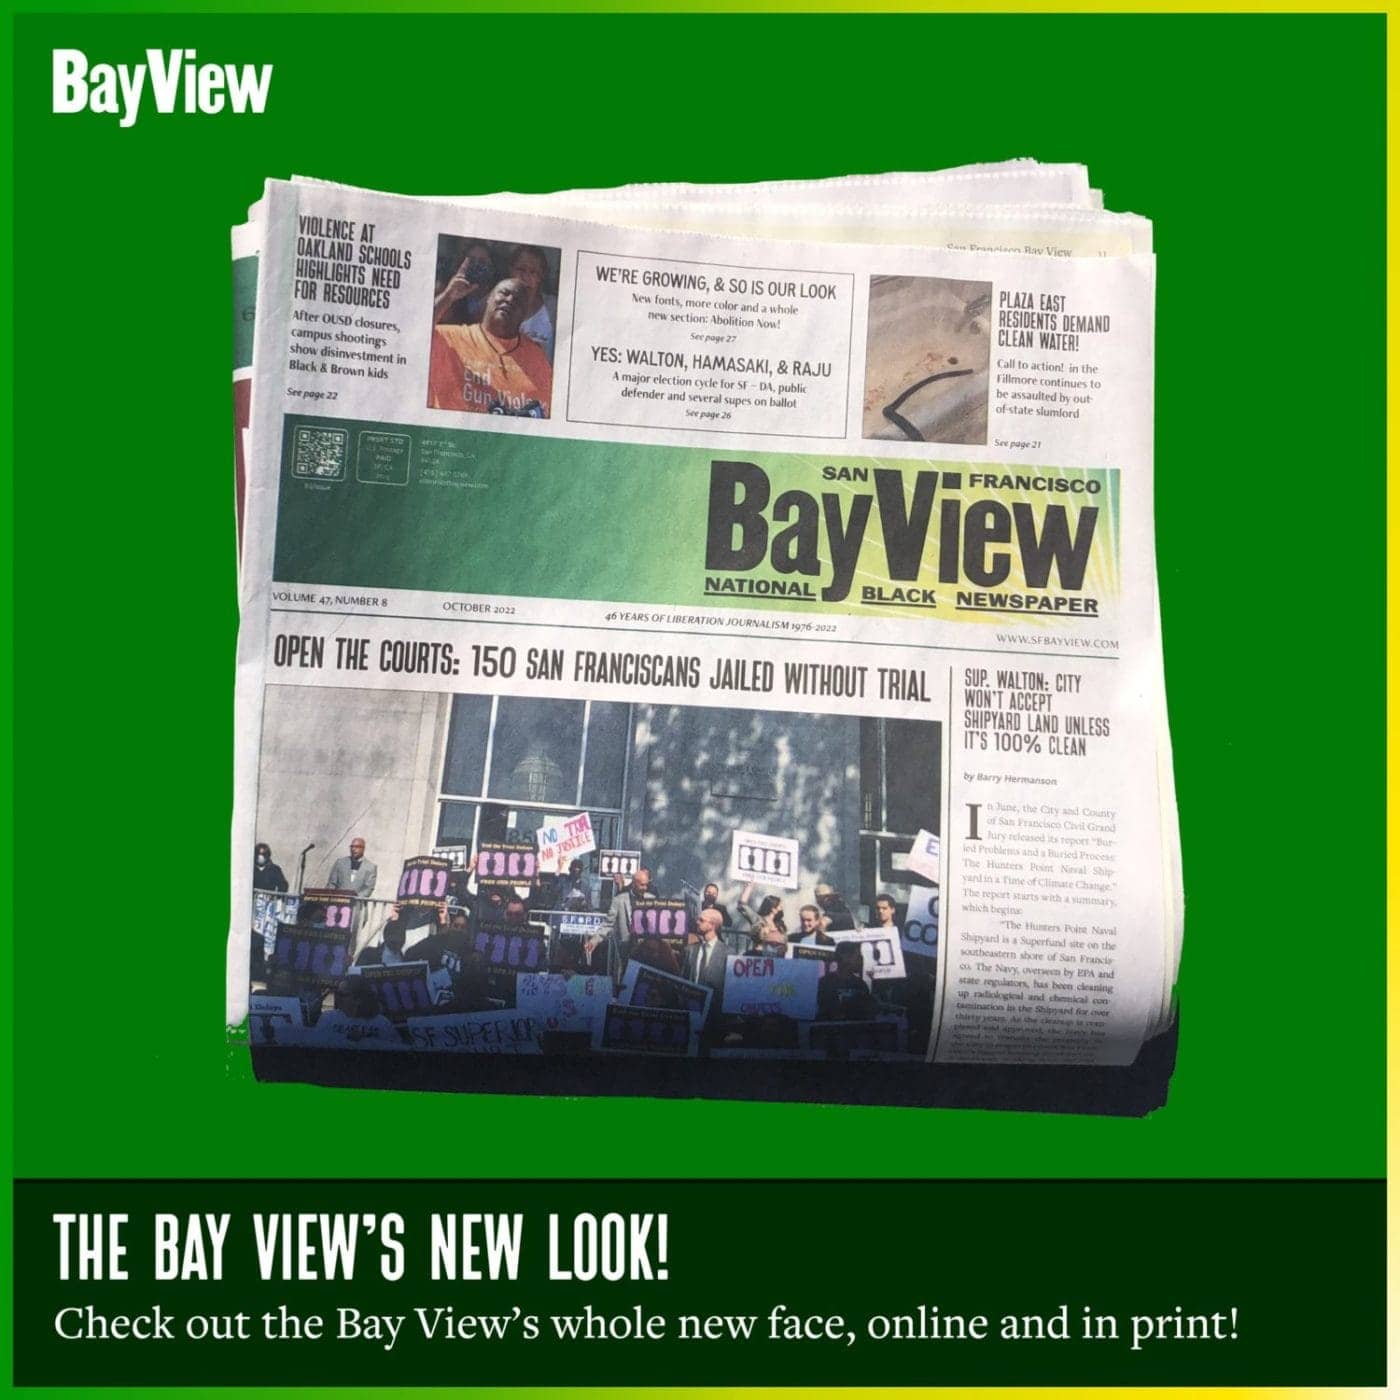 Bay-Views-new-look-graphic-by-Sophia-0922-1400x1400, The Bay View’s new print layout, Local News & Views News & Views 